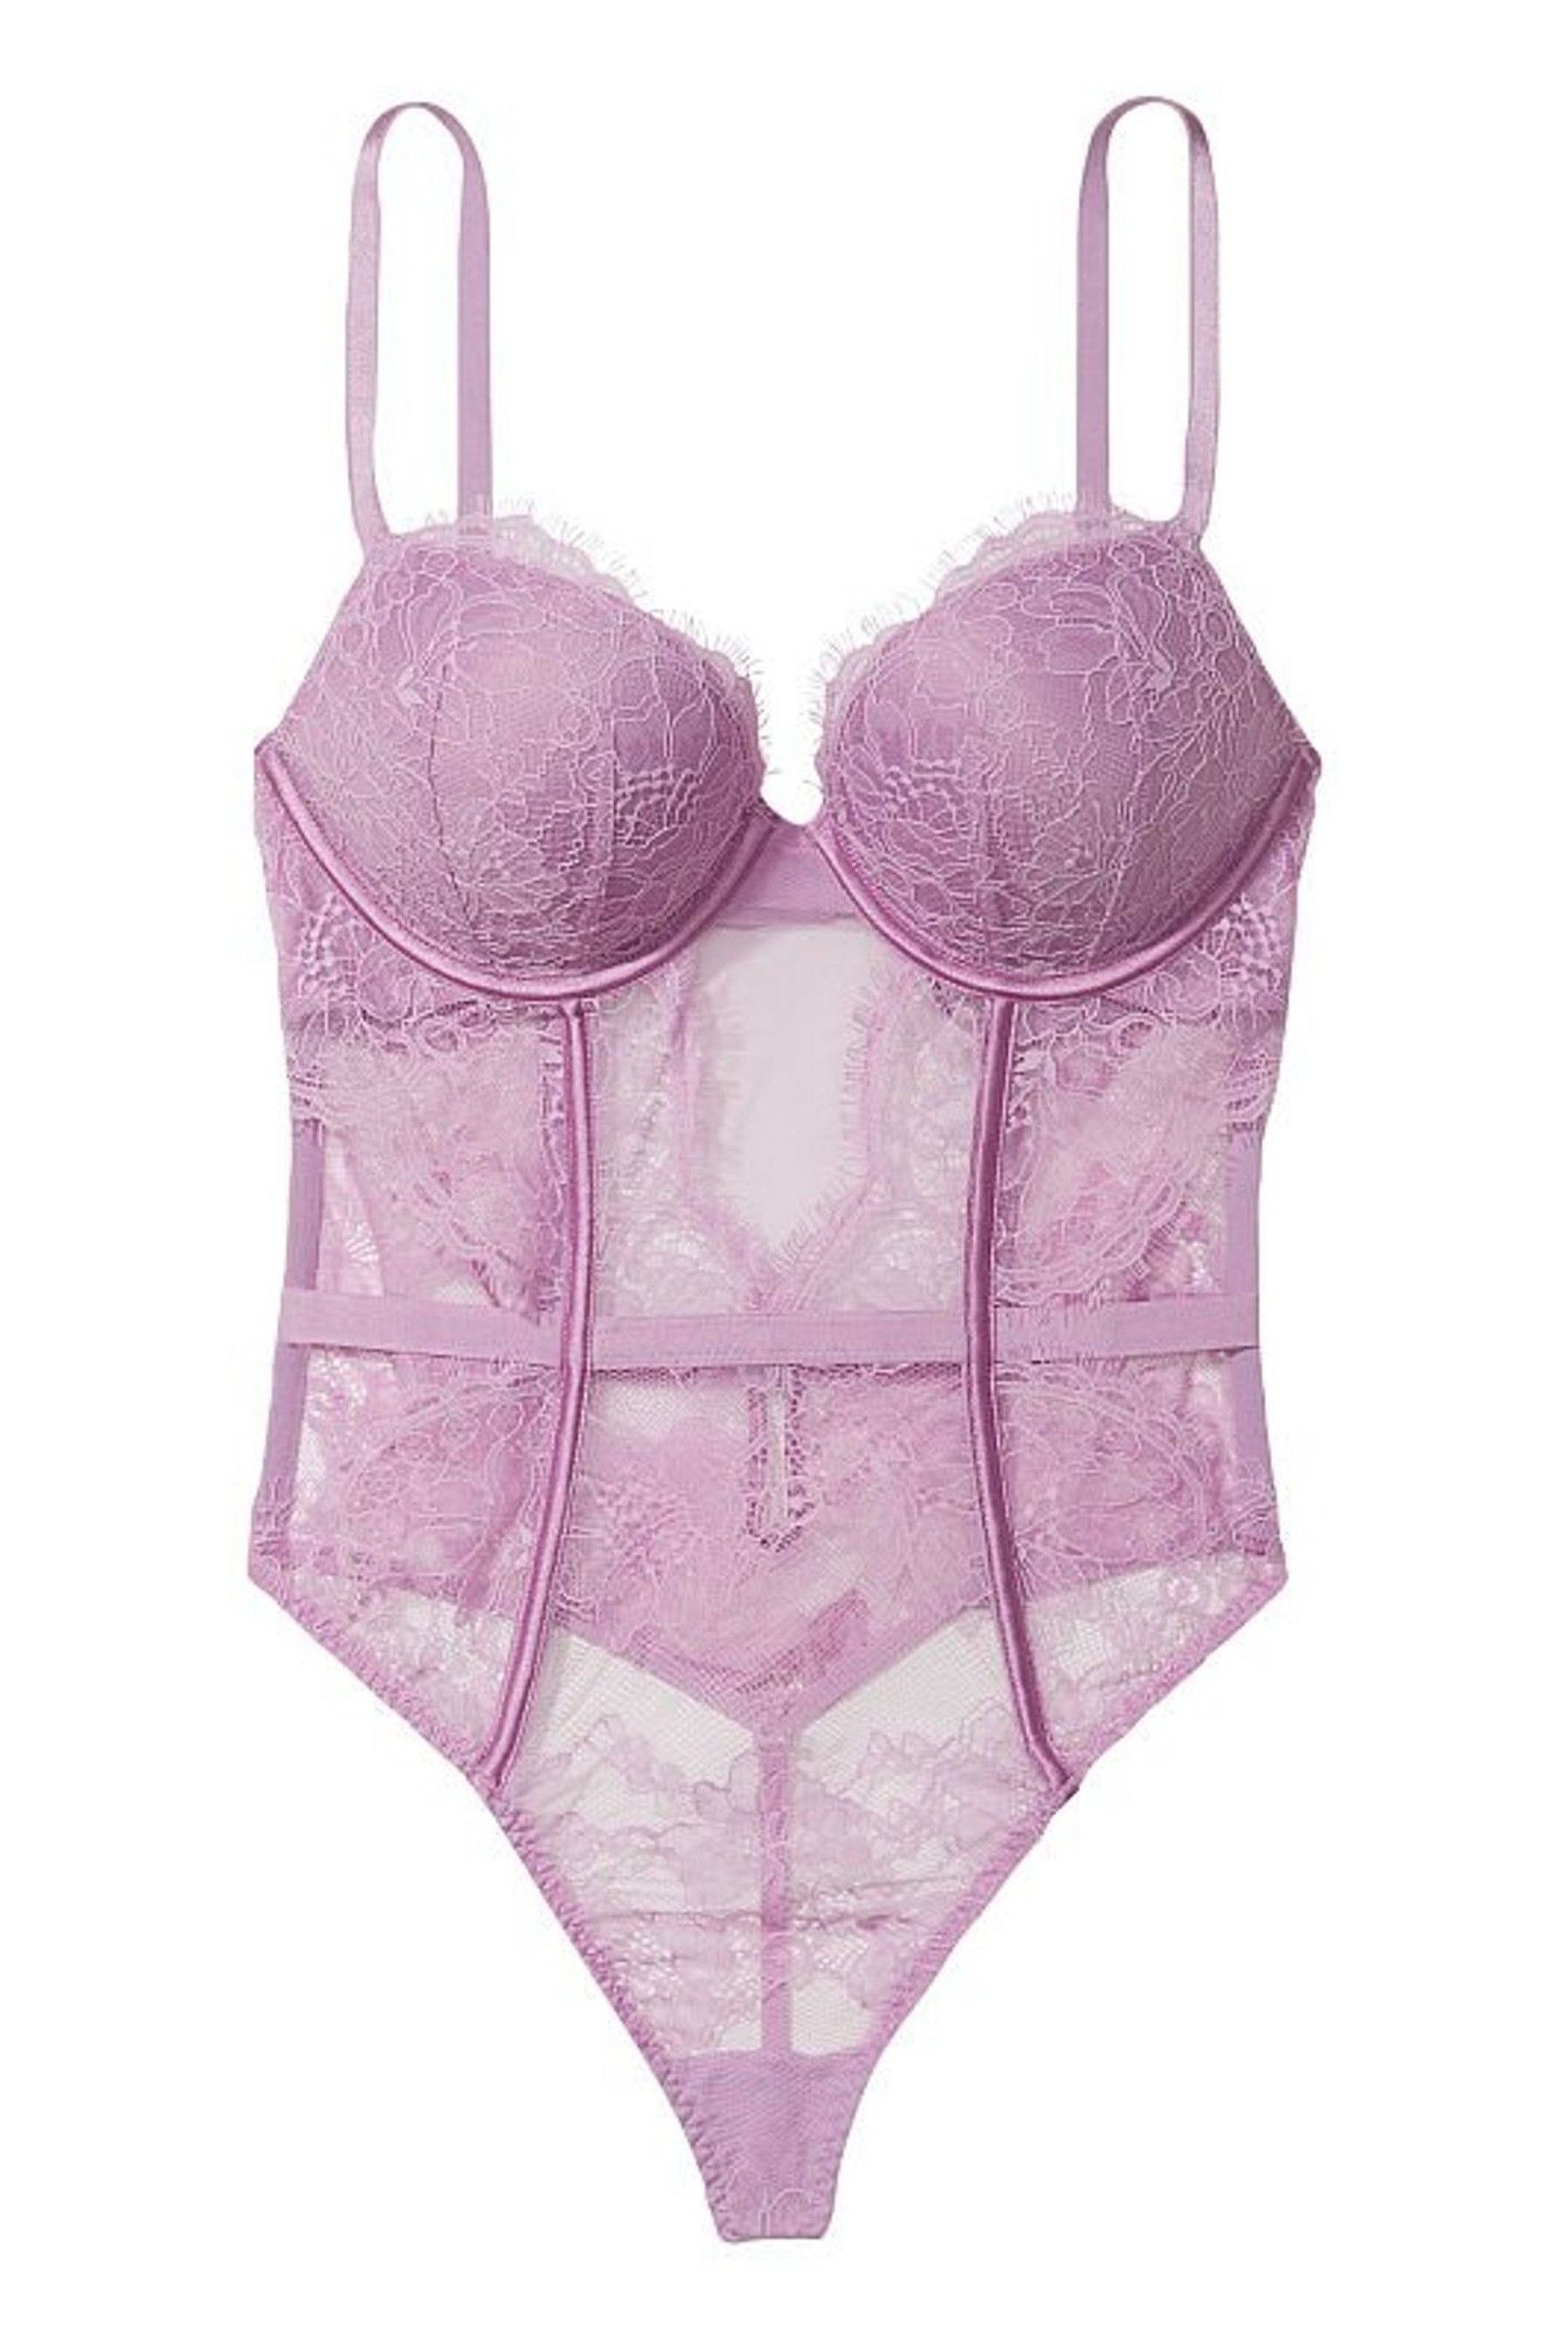 Buy Victoria's Secret Add 2 Cups Lace Bodysuit from the Victoria's ...